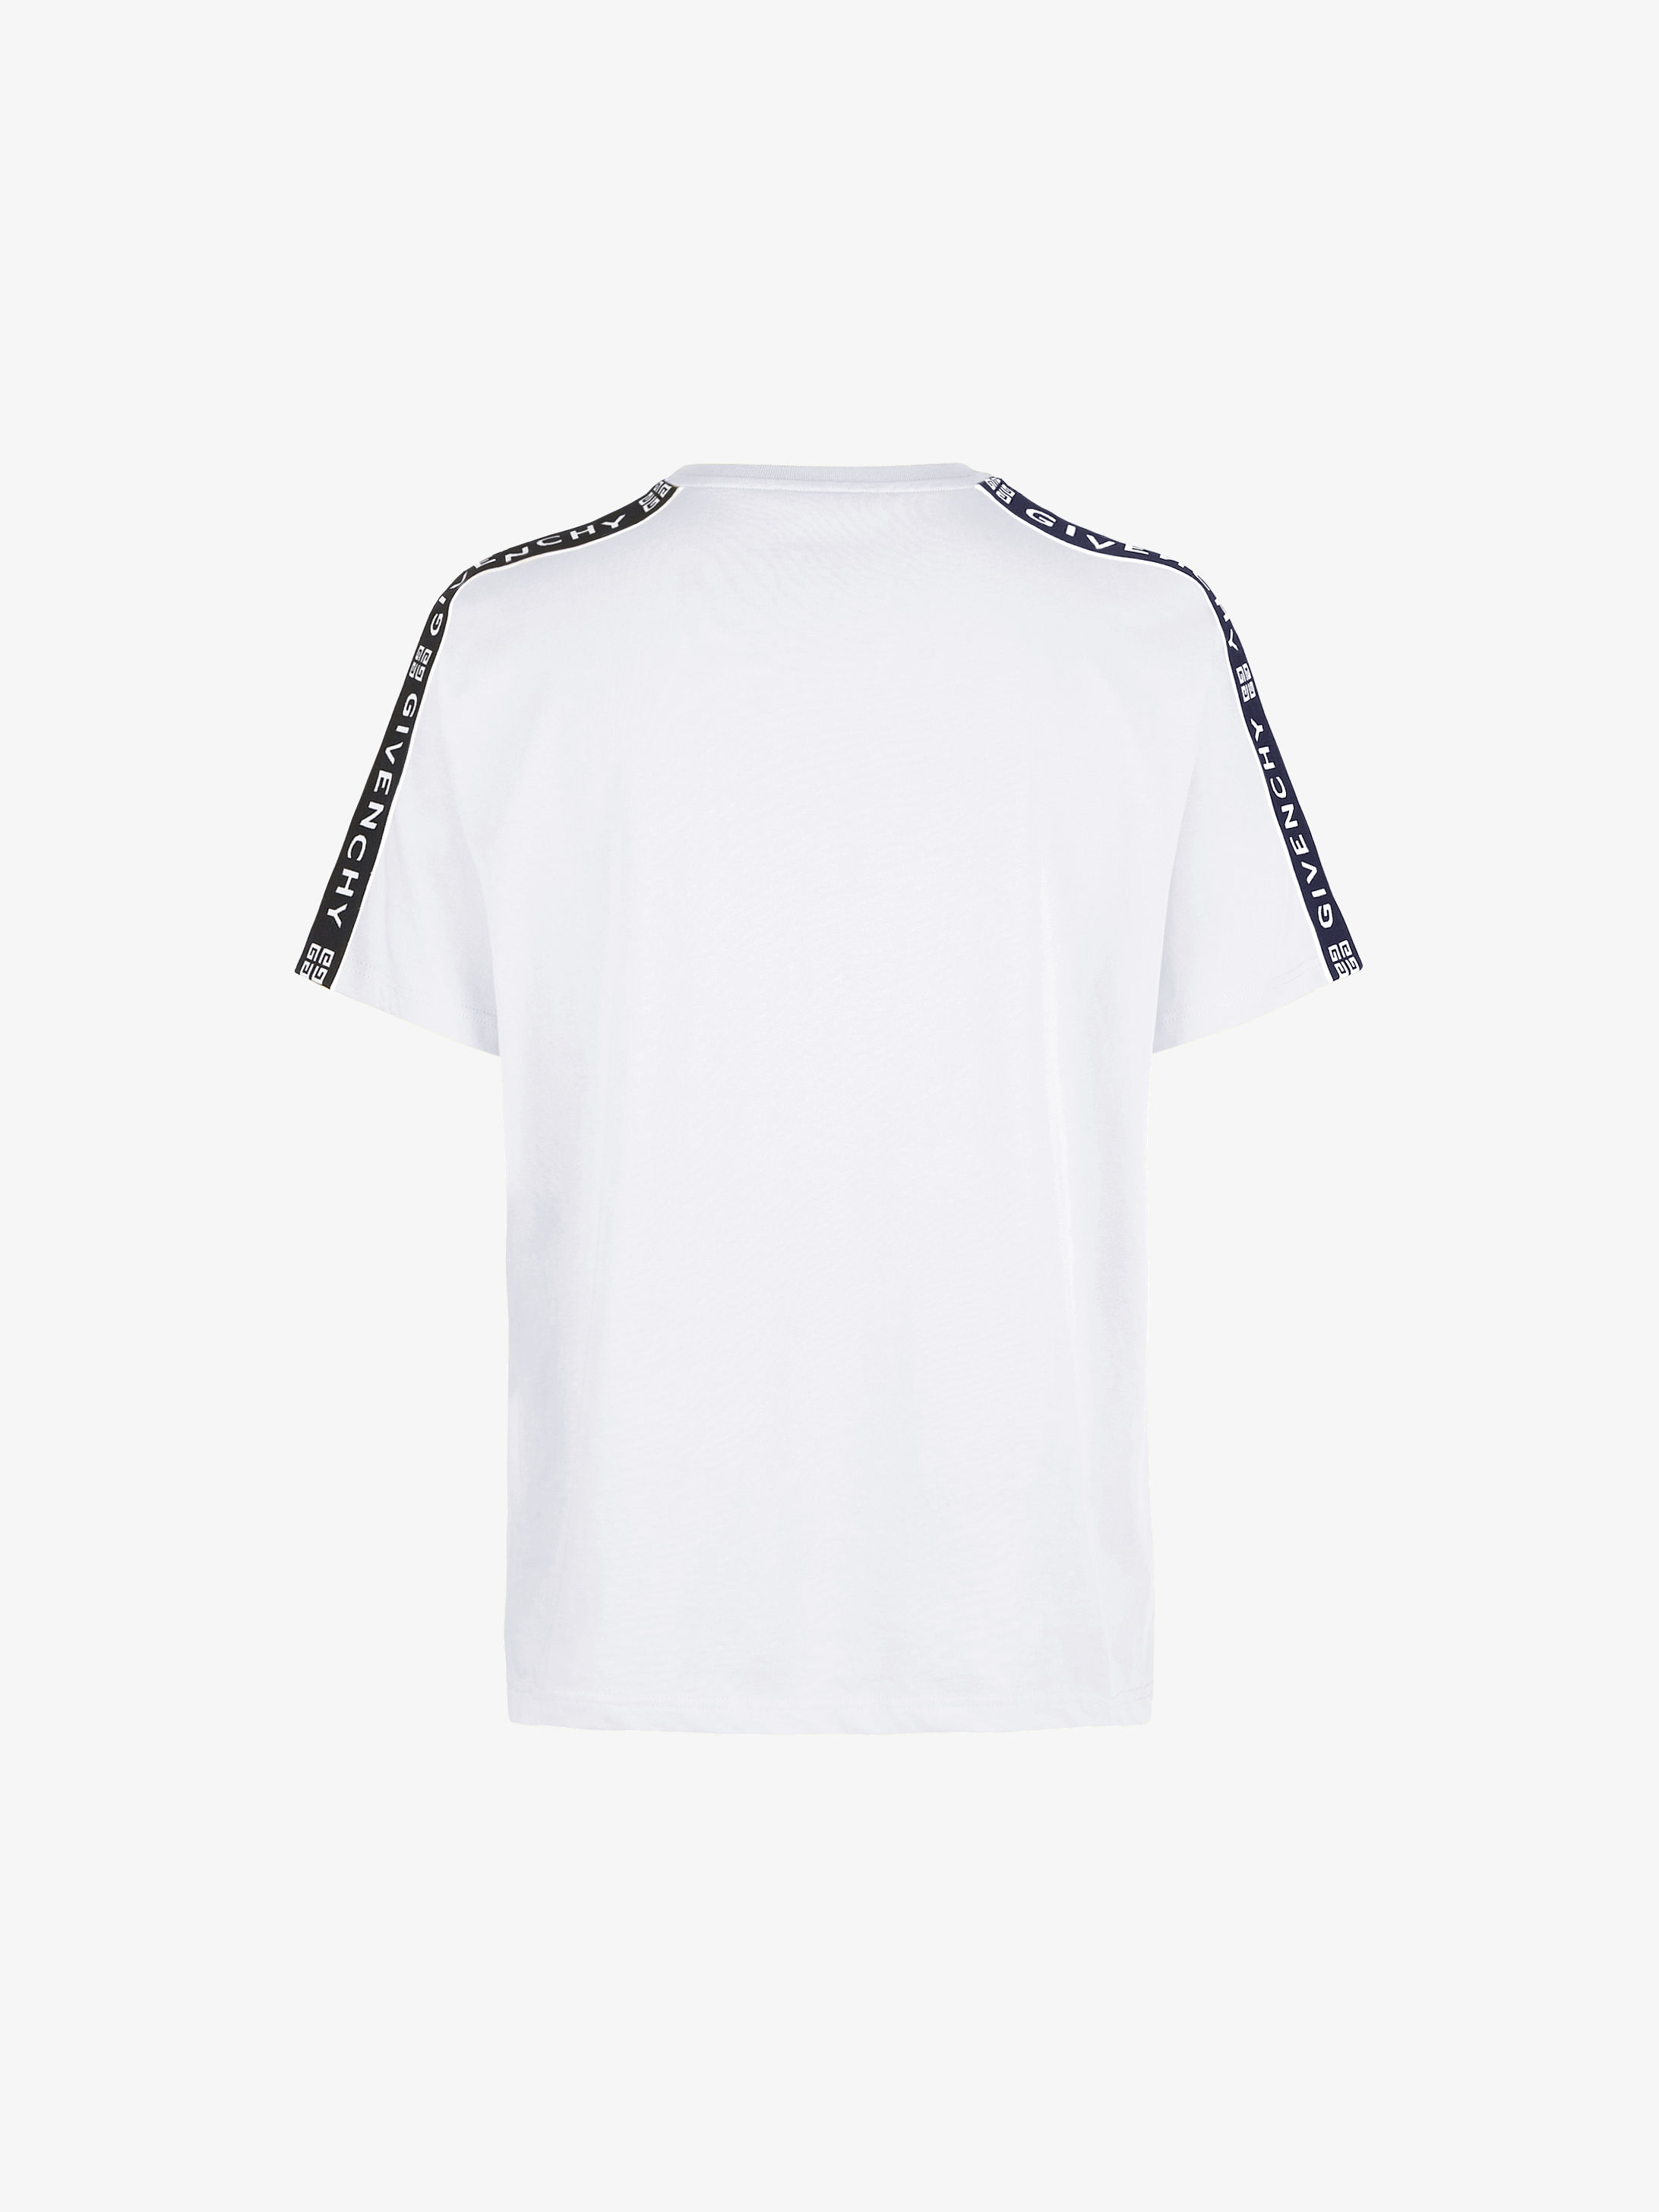 Givenchy White Tape T-Shirt - Rogue